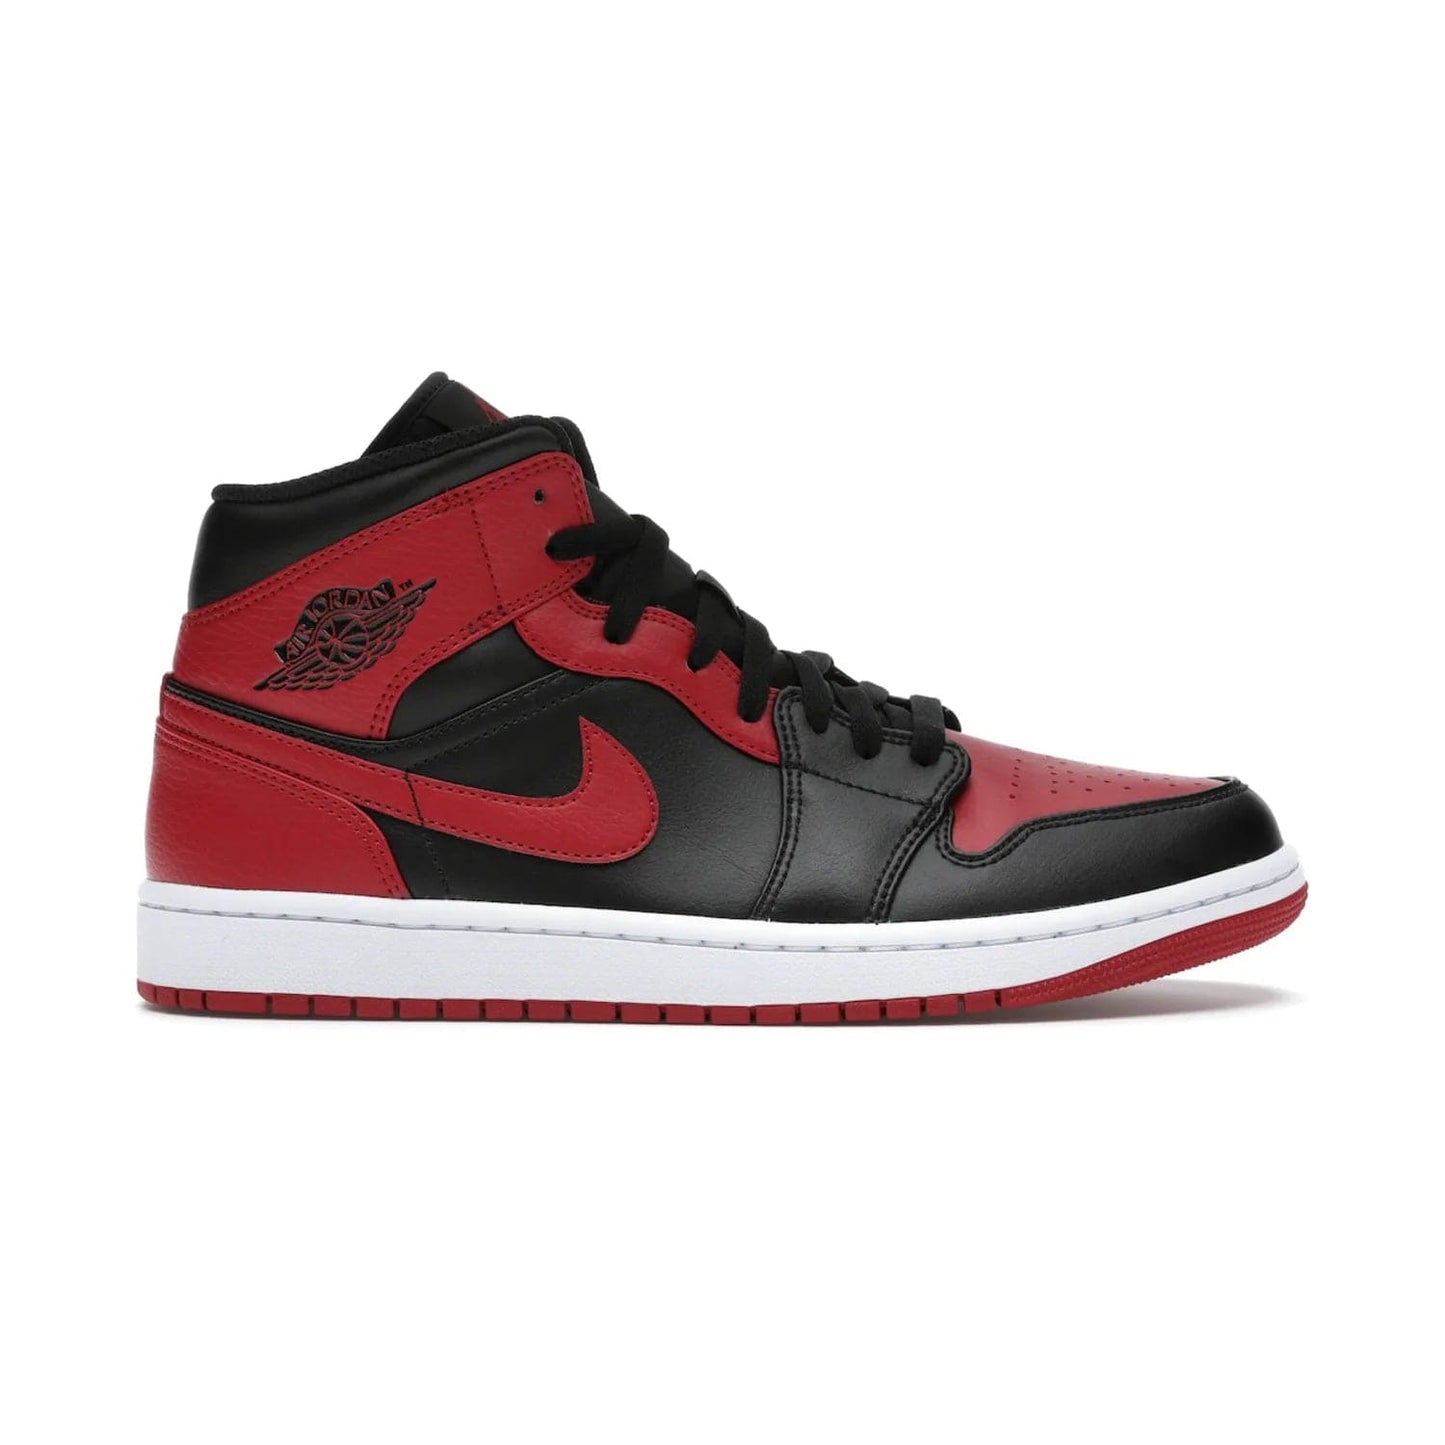 Jordan 1 Mid Banned (2020) - Image 1 - Only at www.BallersClubKickz.com - The Air Jordan 1 Mid Banned (2020) brings a modern twist to the classic Banned colorway. Features full-grain black and red leather uppers, red leather around the toe, collar, heel, & Swoosh. Release November 2021 for $110.